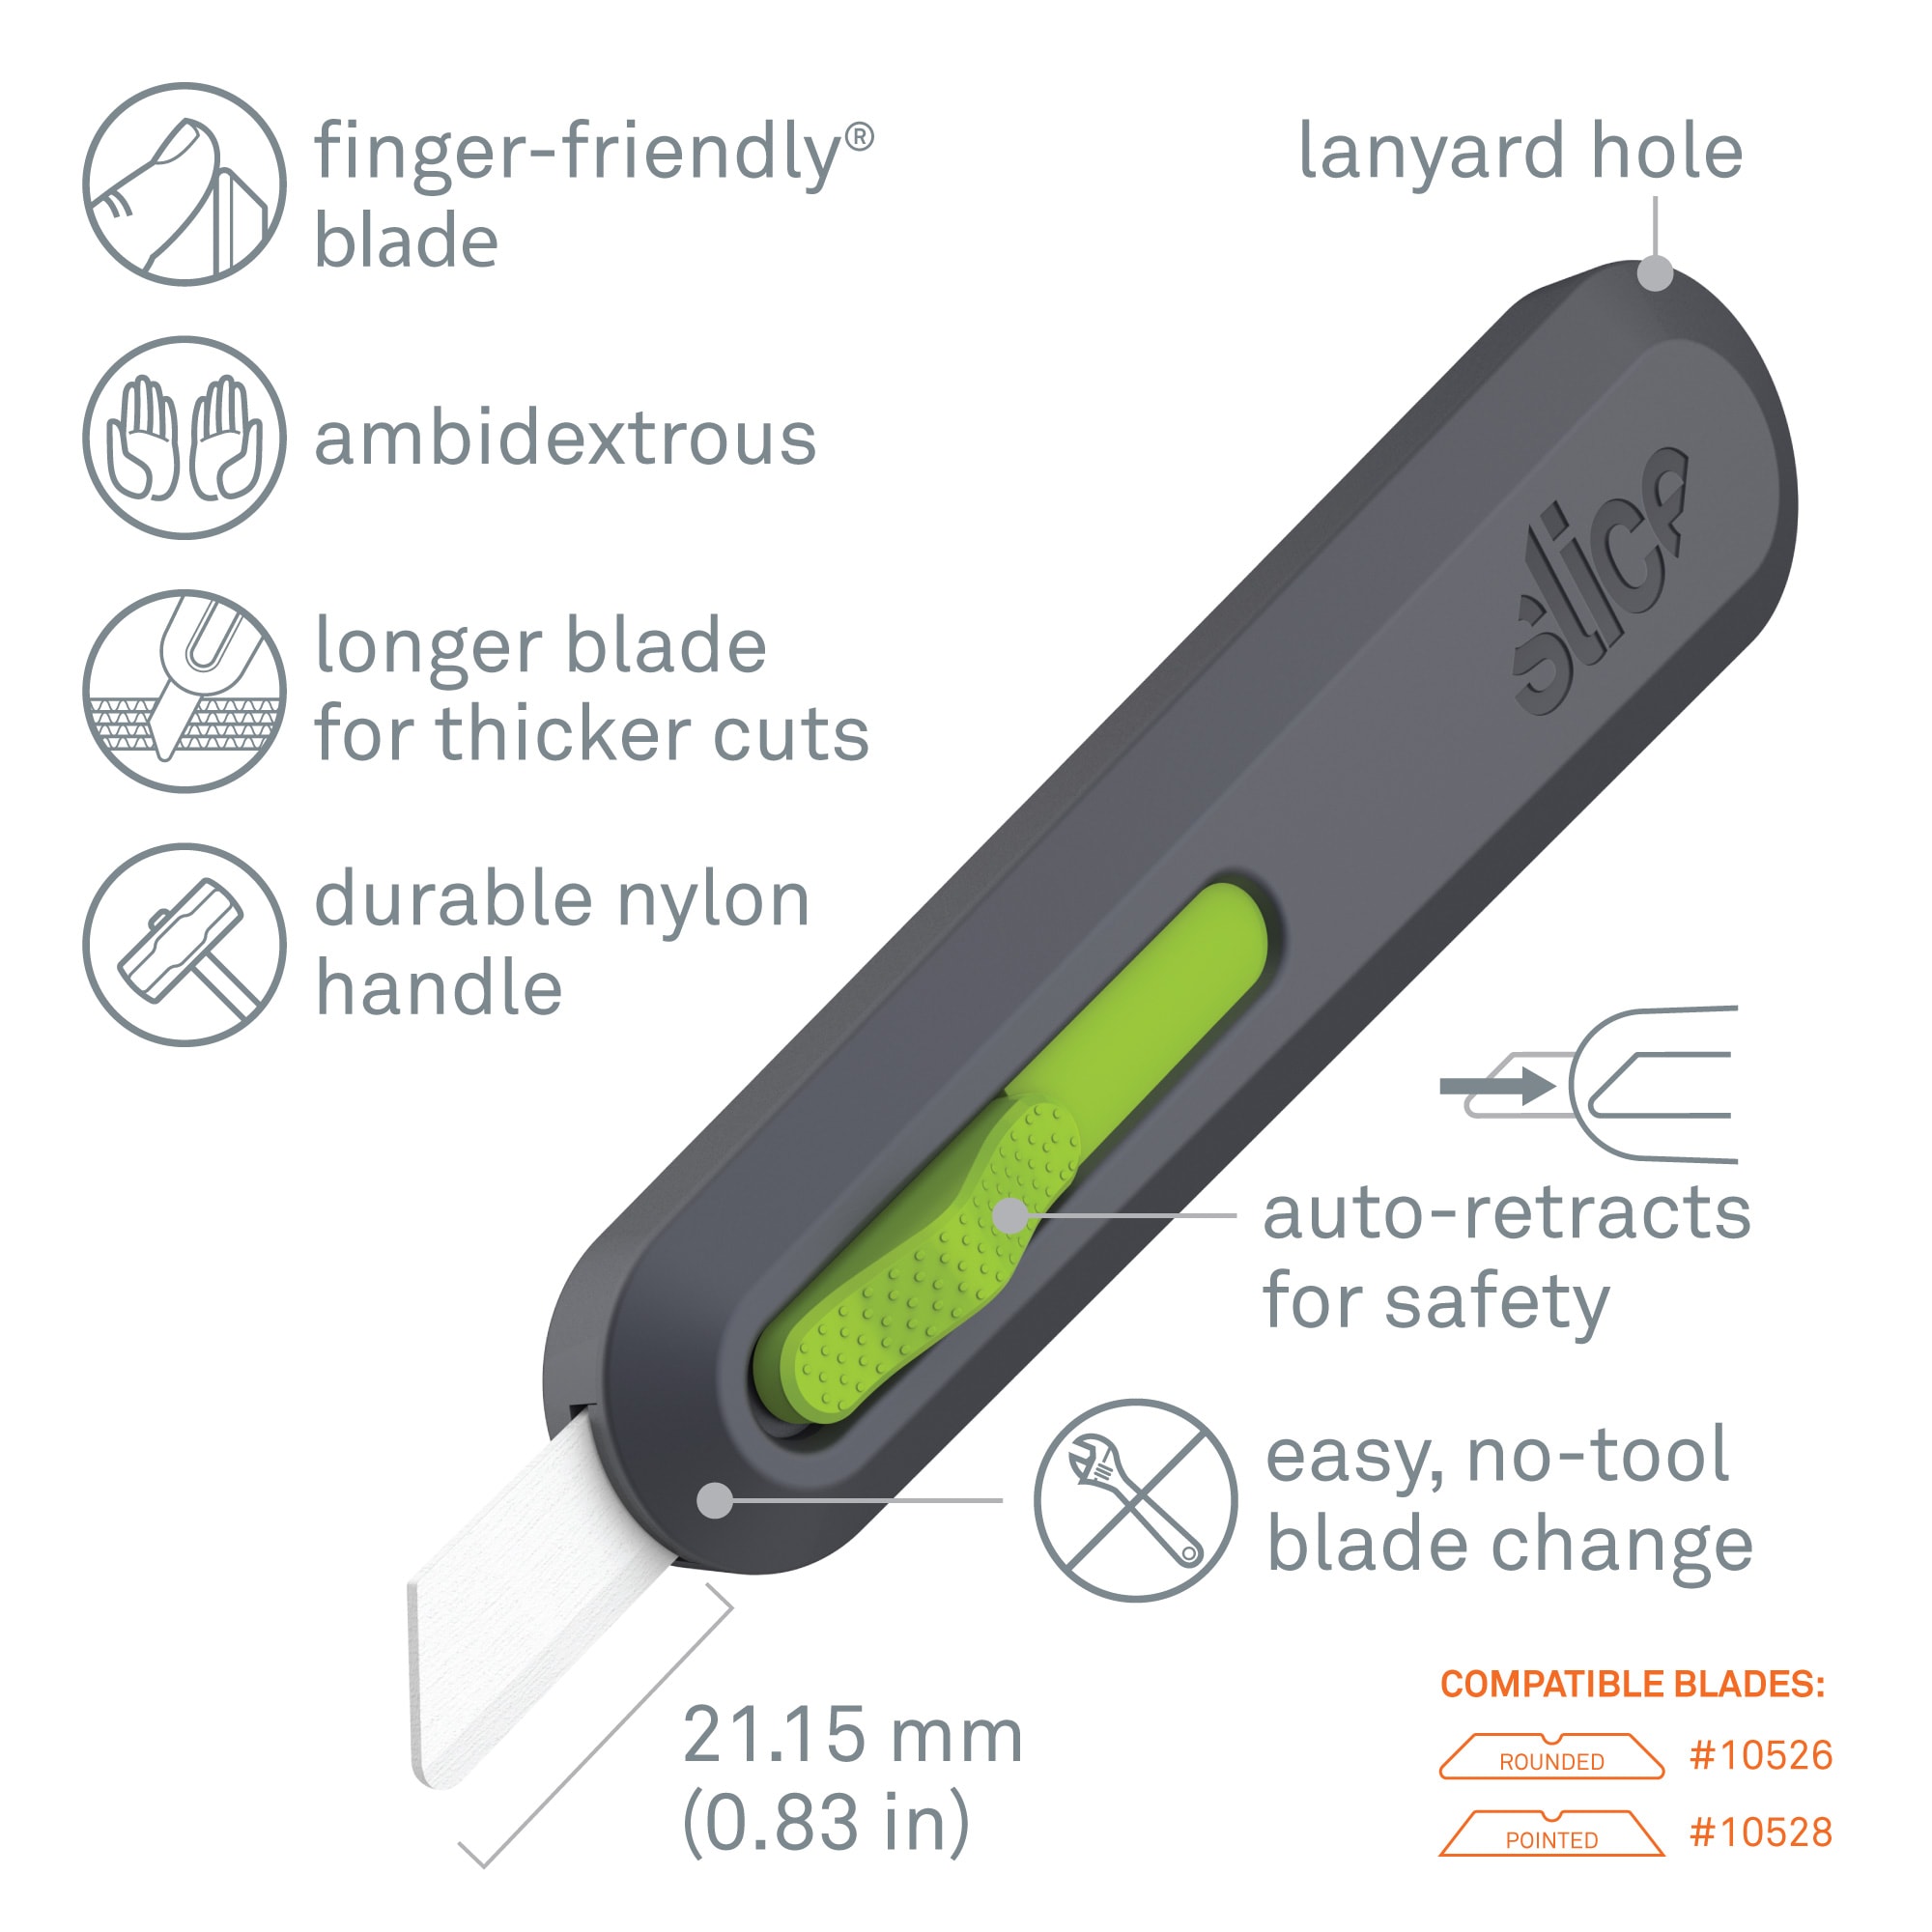 Slice Auto-Retractable Utility Knife (Pack of 6)